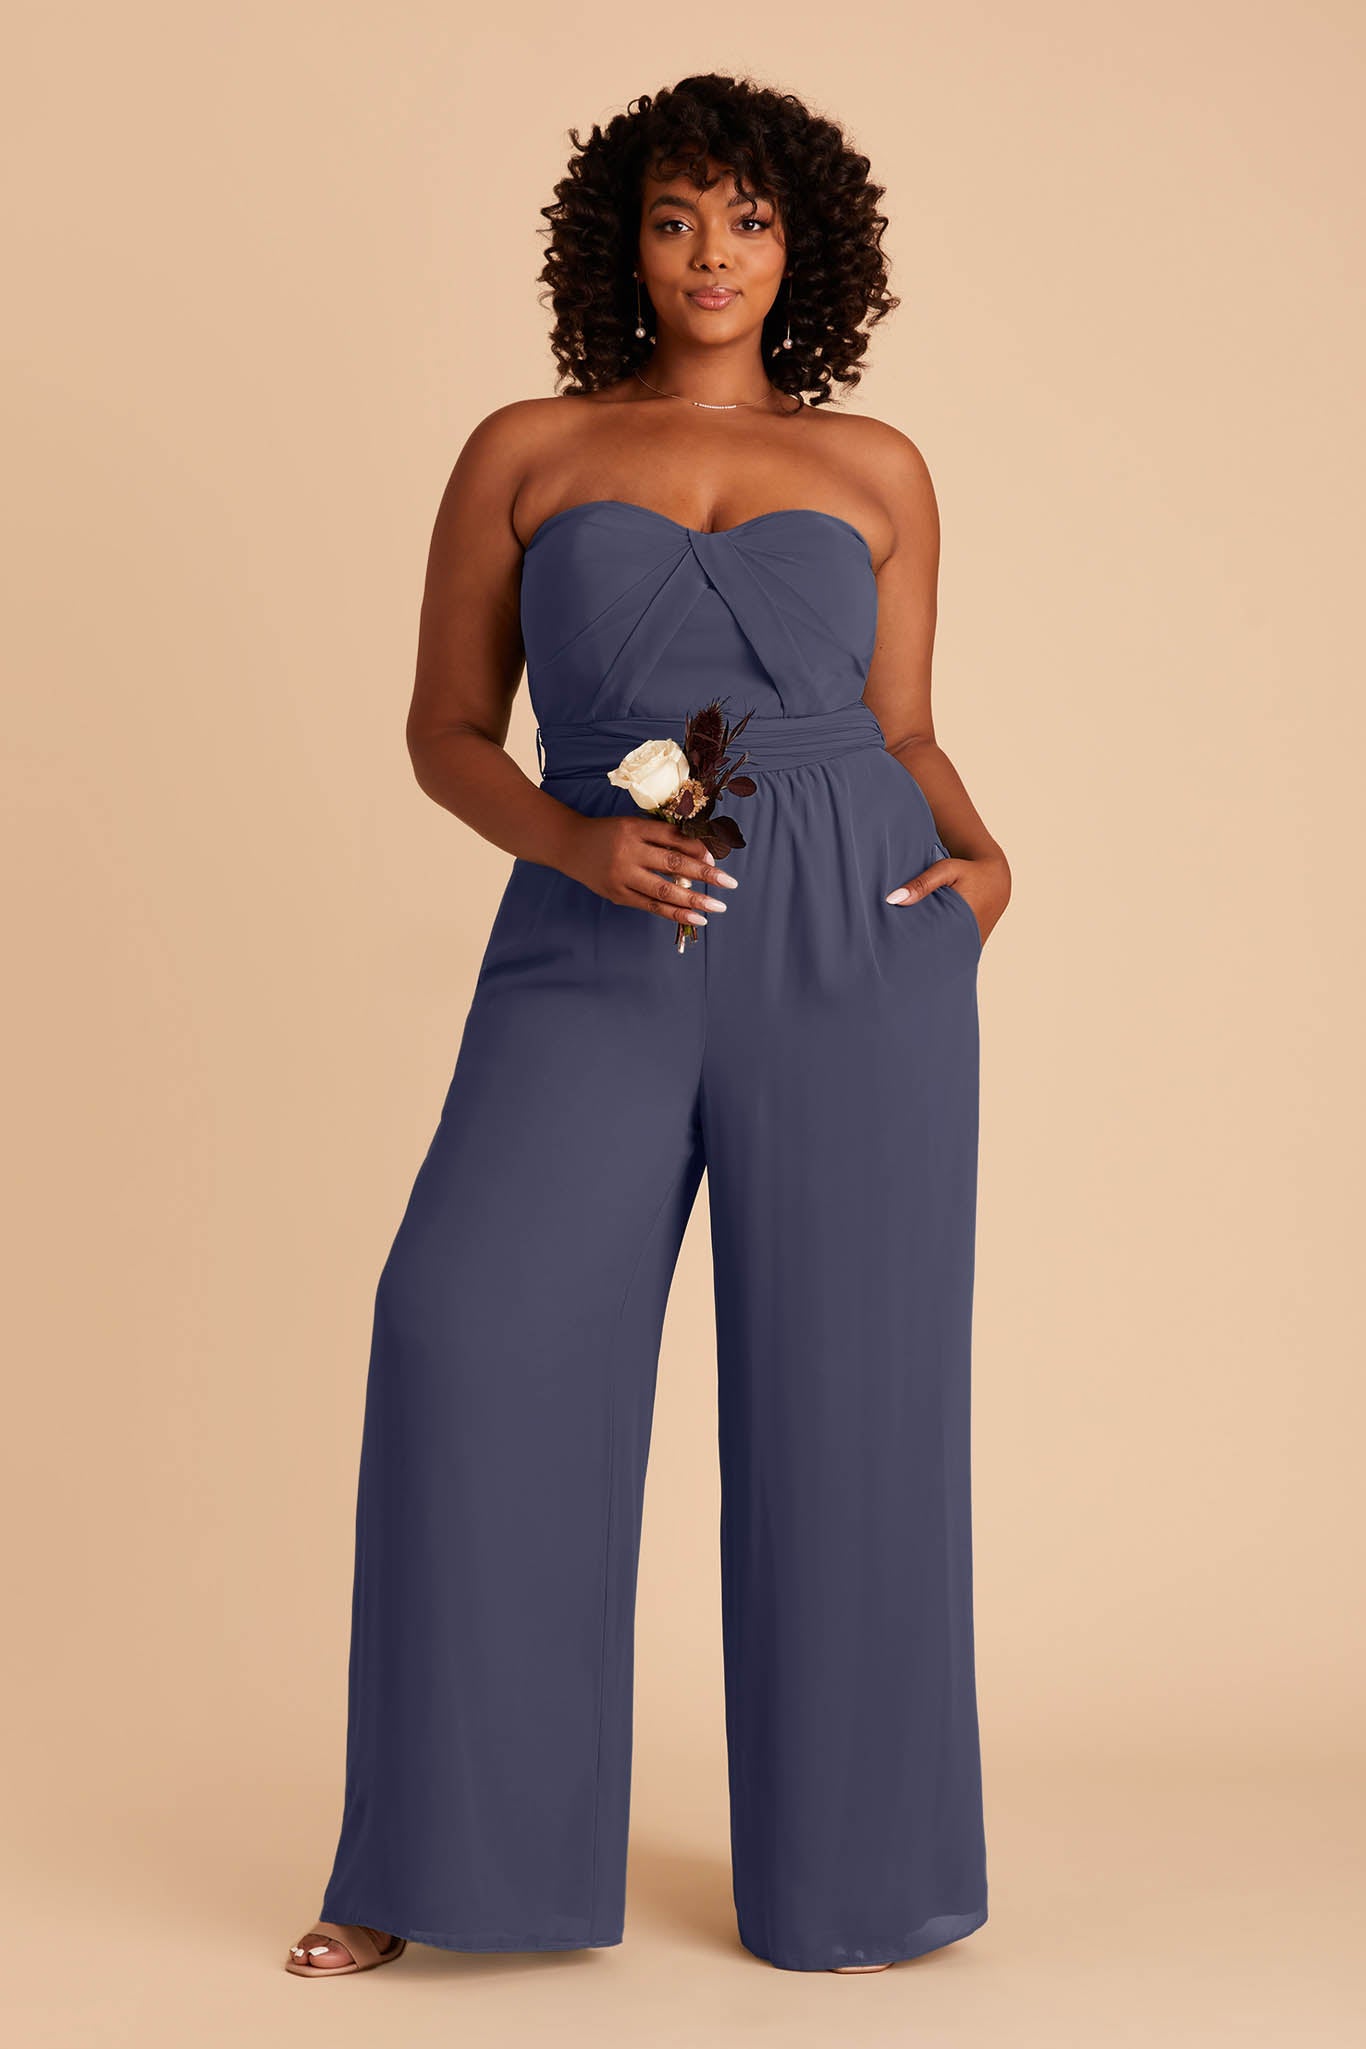 Style Pantry | Fitted Blazer Contrast Waist Jumpsuit | Jumpsuit fashion,  Stylish summer outfits, Jumpsuit